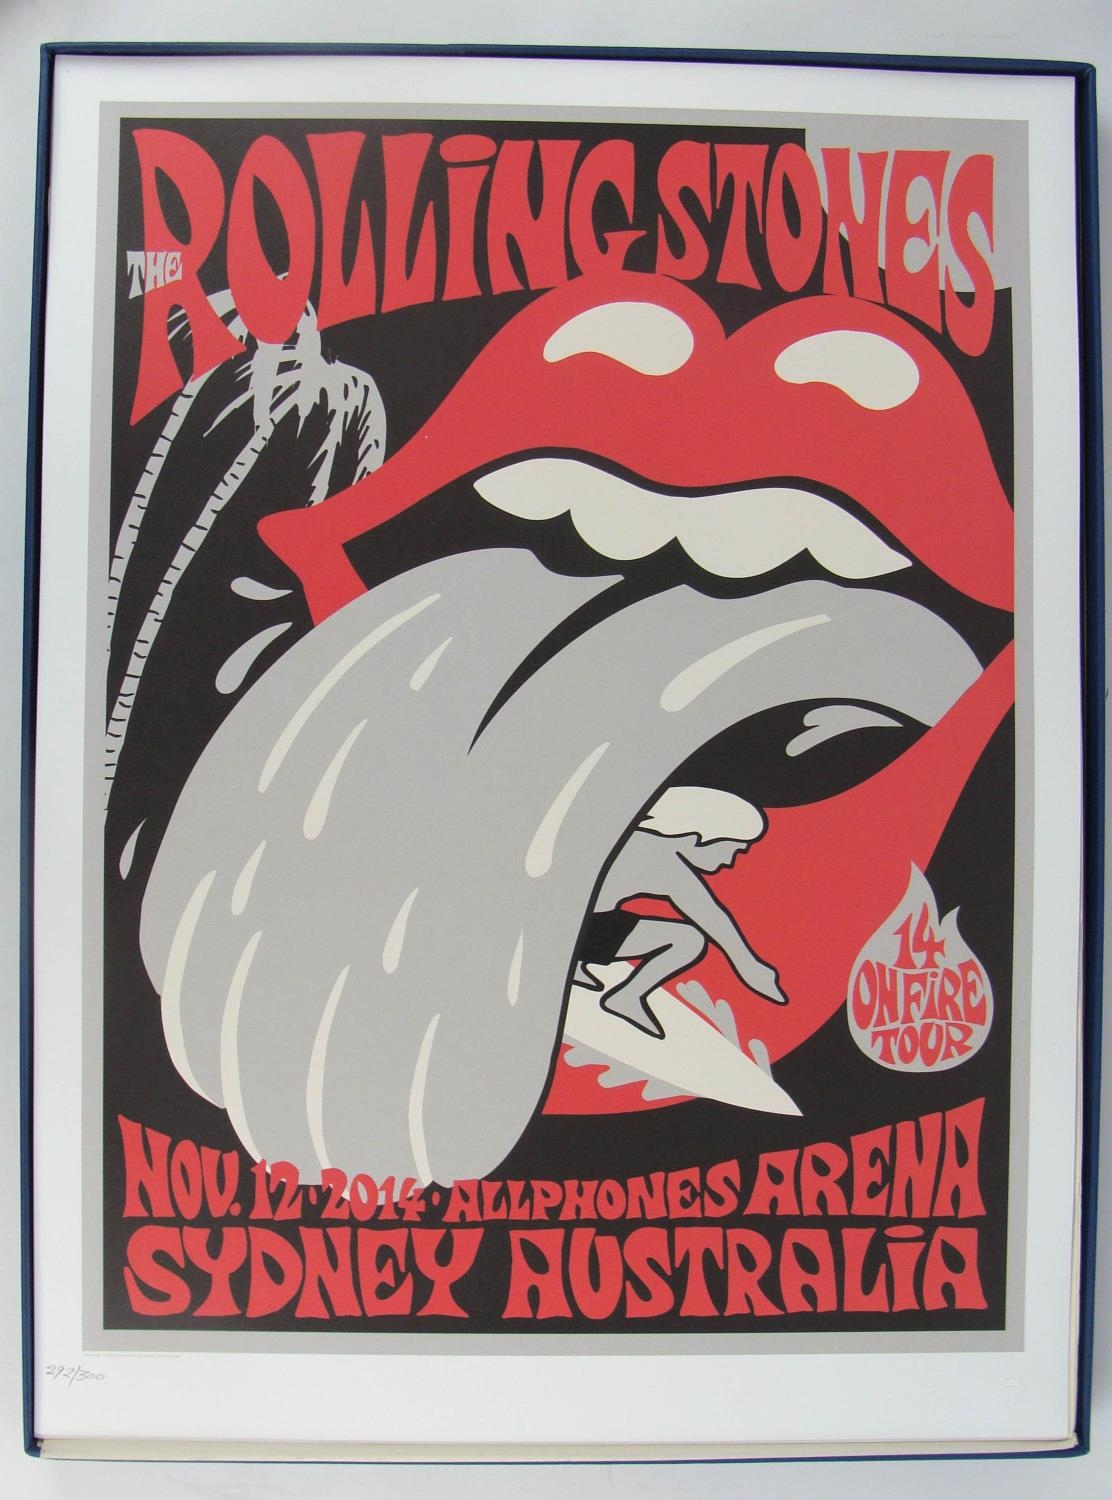 ROLLING STONES '14 on FIRE' BOX SET, of 13 lithographic posters from the 2014 Australia and New - Image 12 of 21